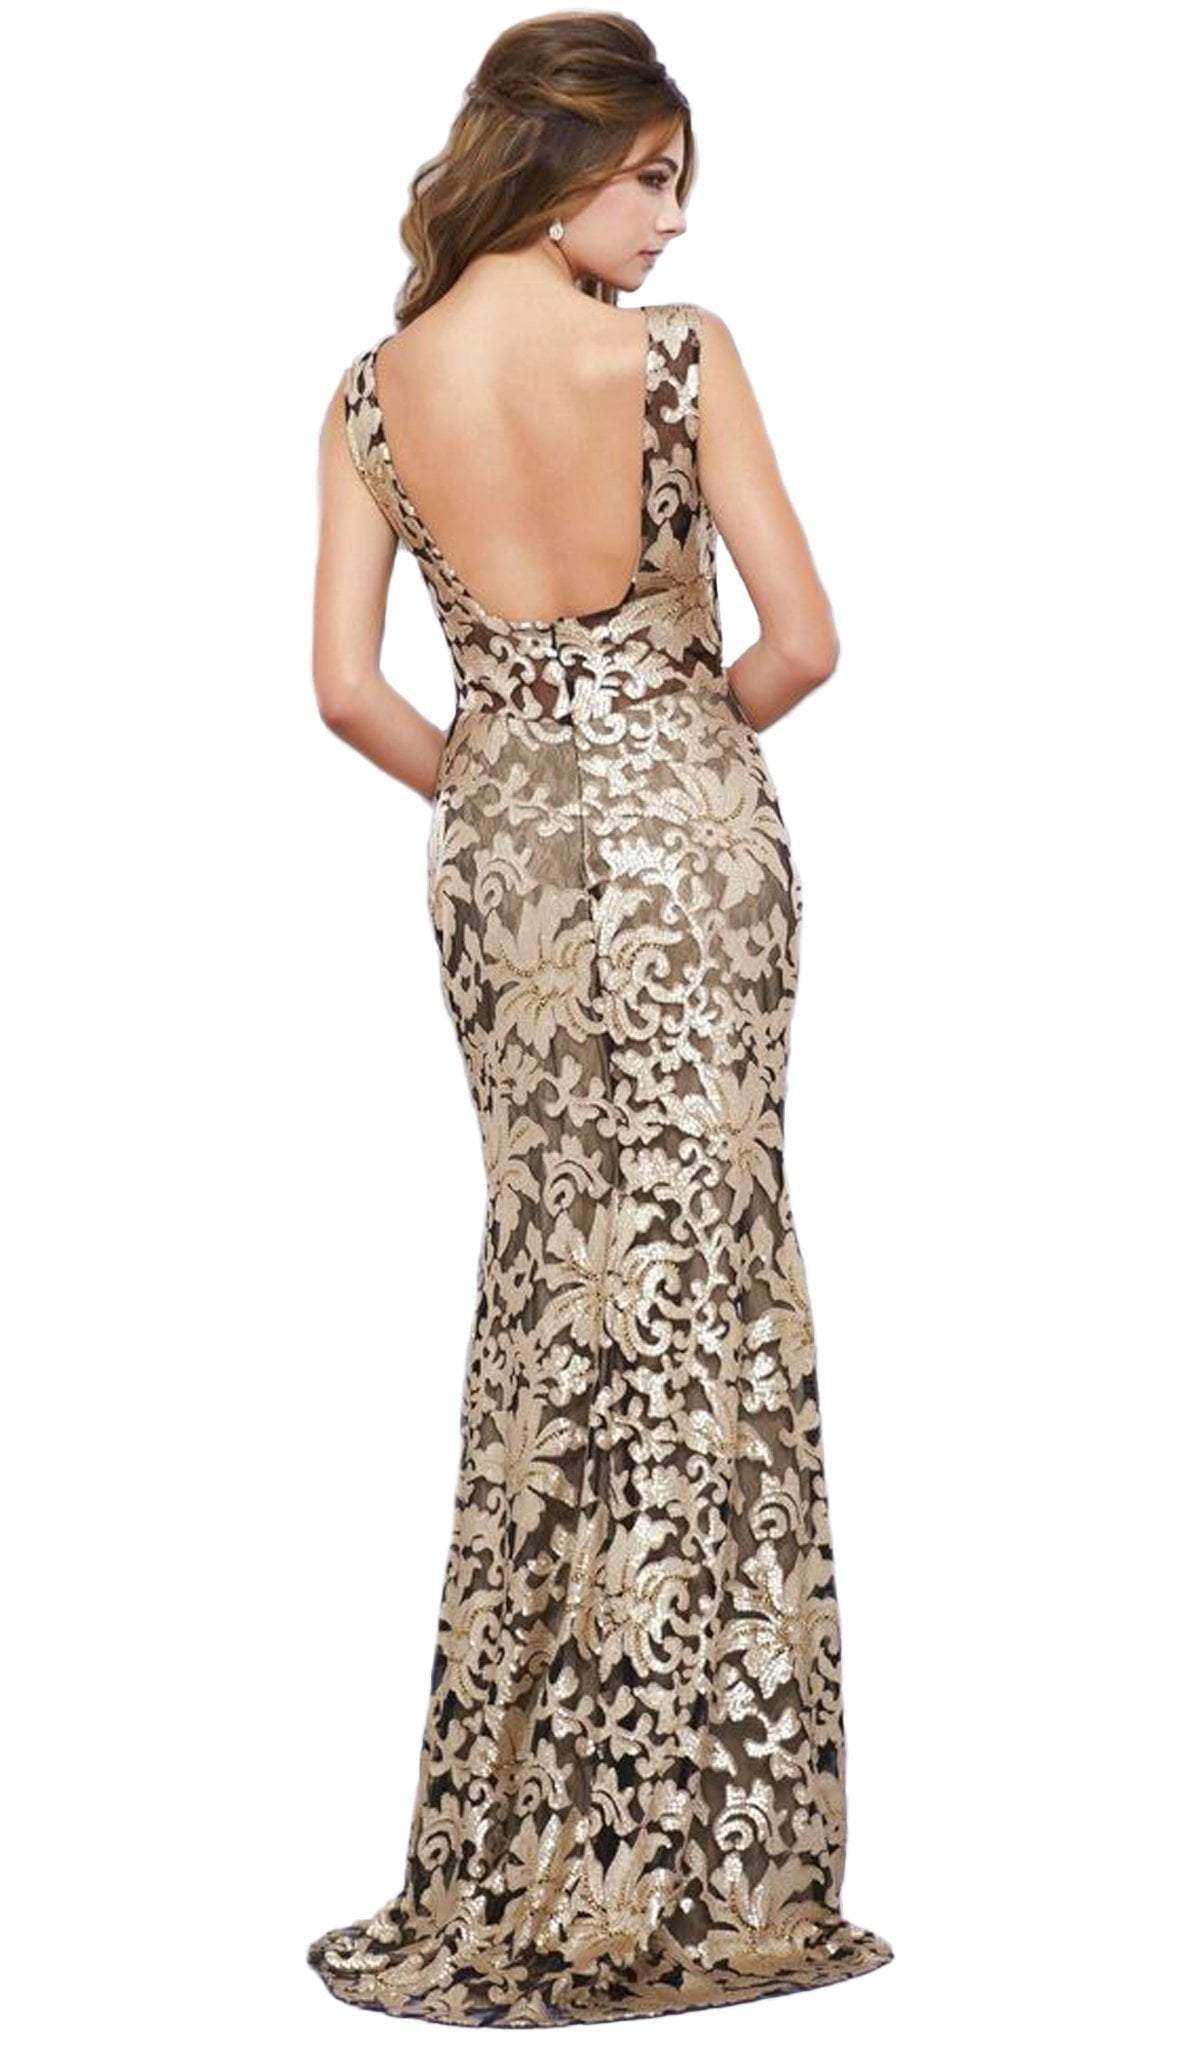 Nox Anabel - 8260 Sleeveless Sequined Lace Evening Dress Special Occasion Dress